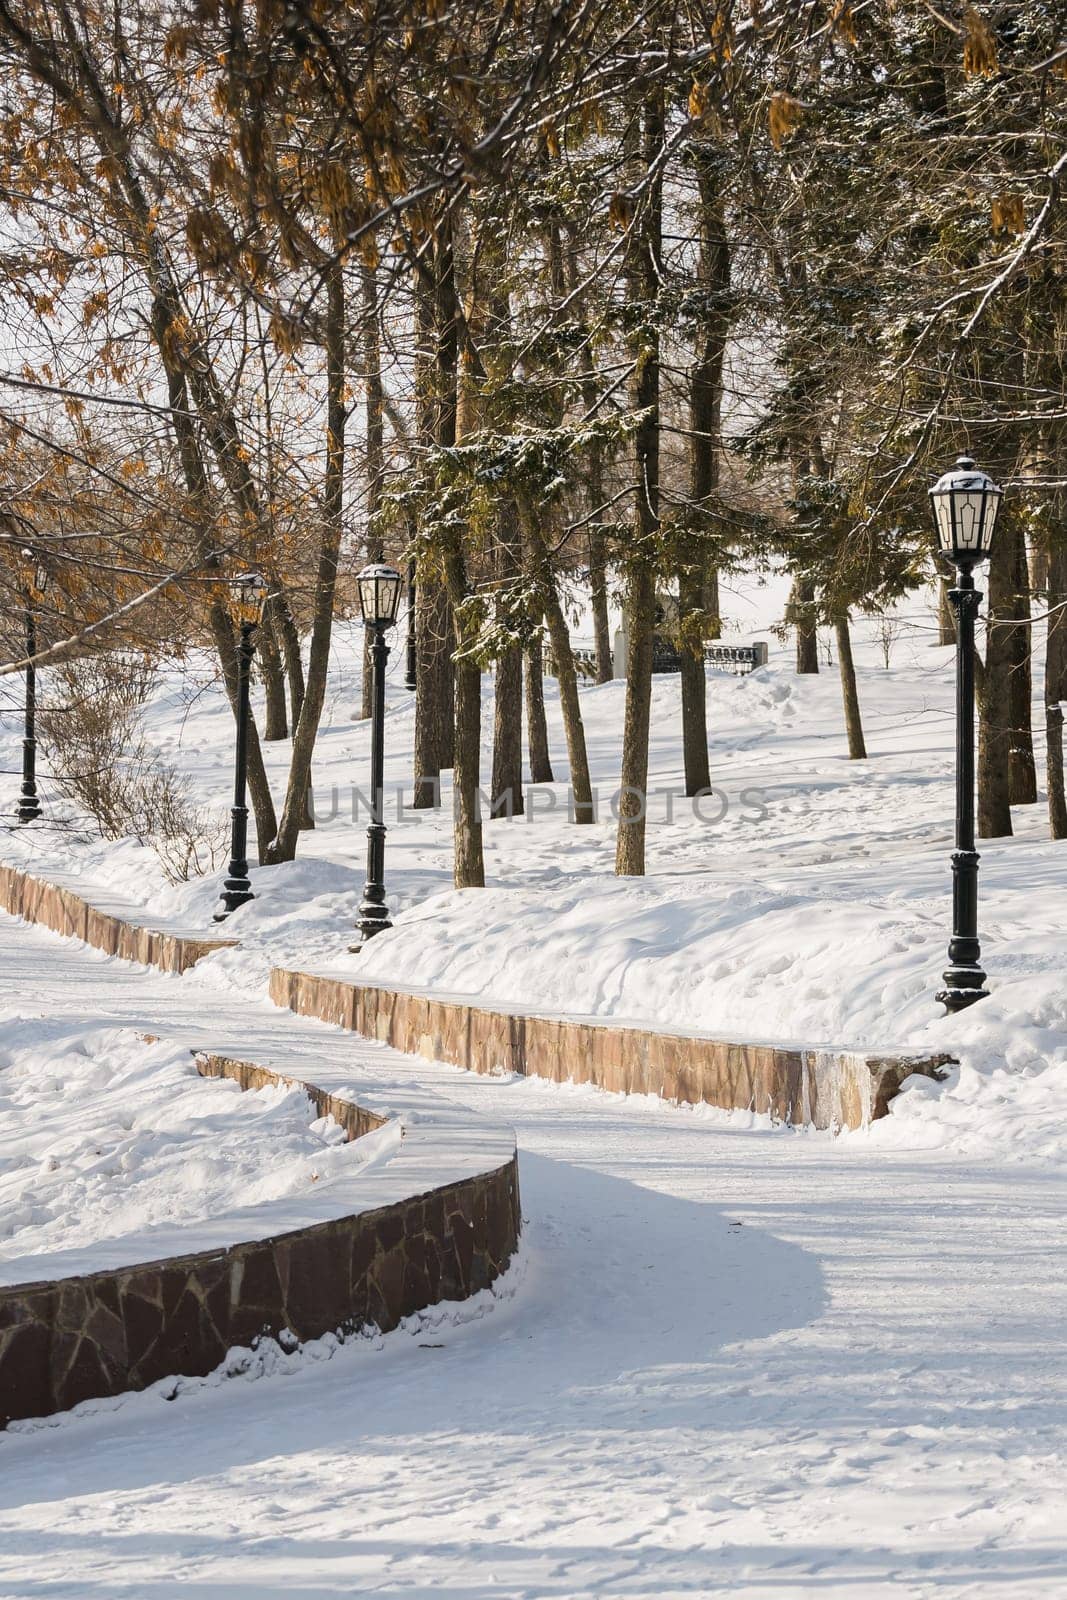 Snowy winter public park in city. Snowy walking path and frost trees. Cold season concept by Satura86